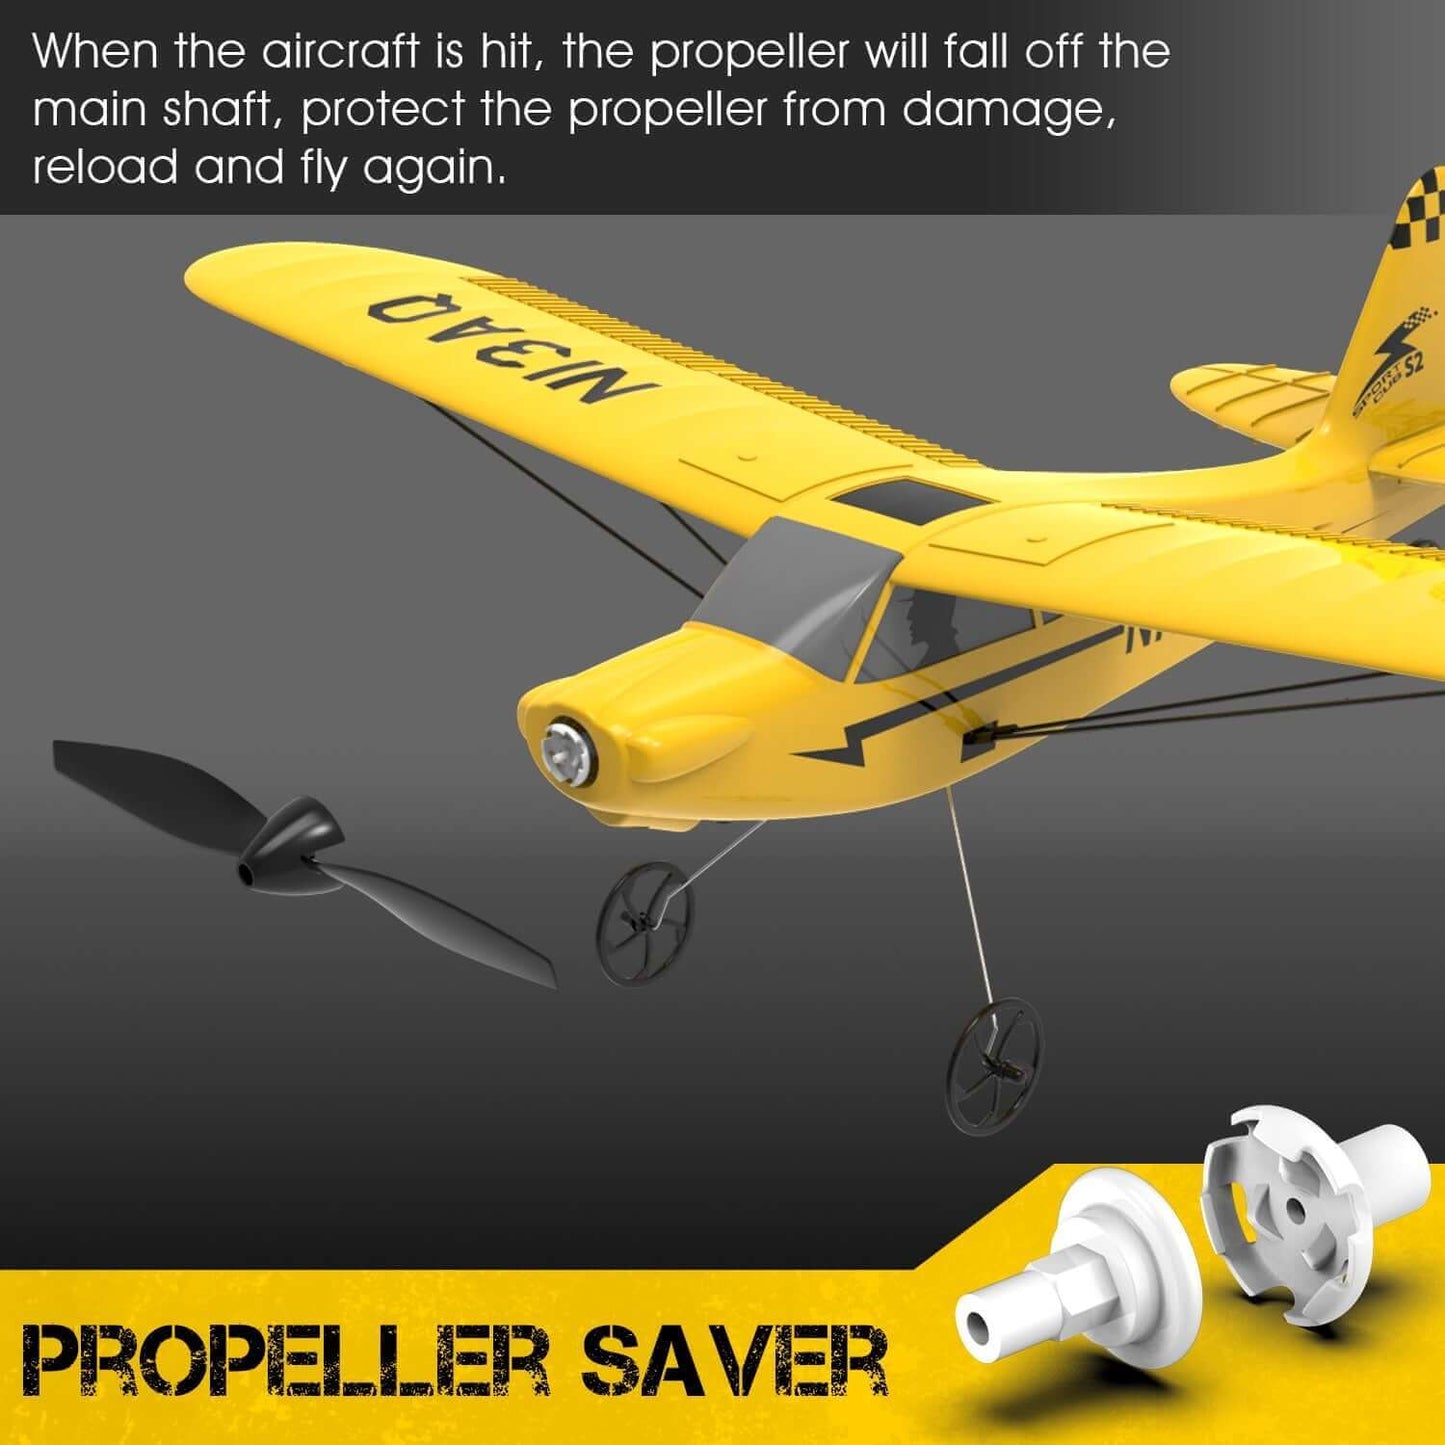 the Sport Cub S2 RC Plane with 3CH Control | Kids Toy Lover